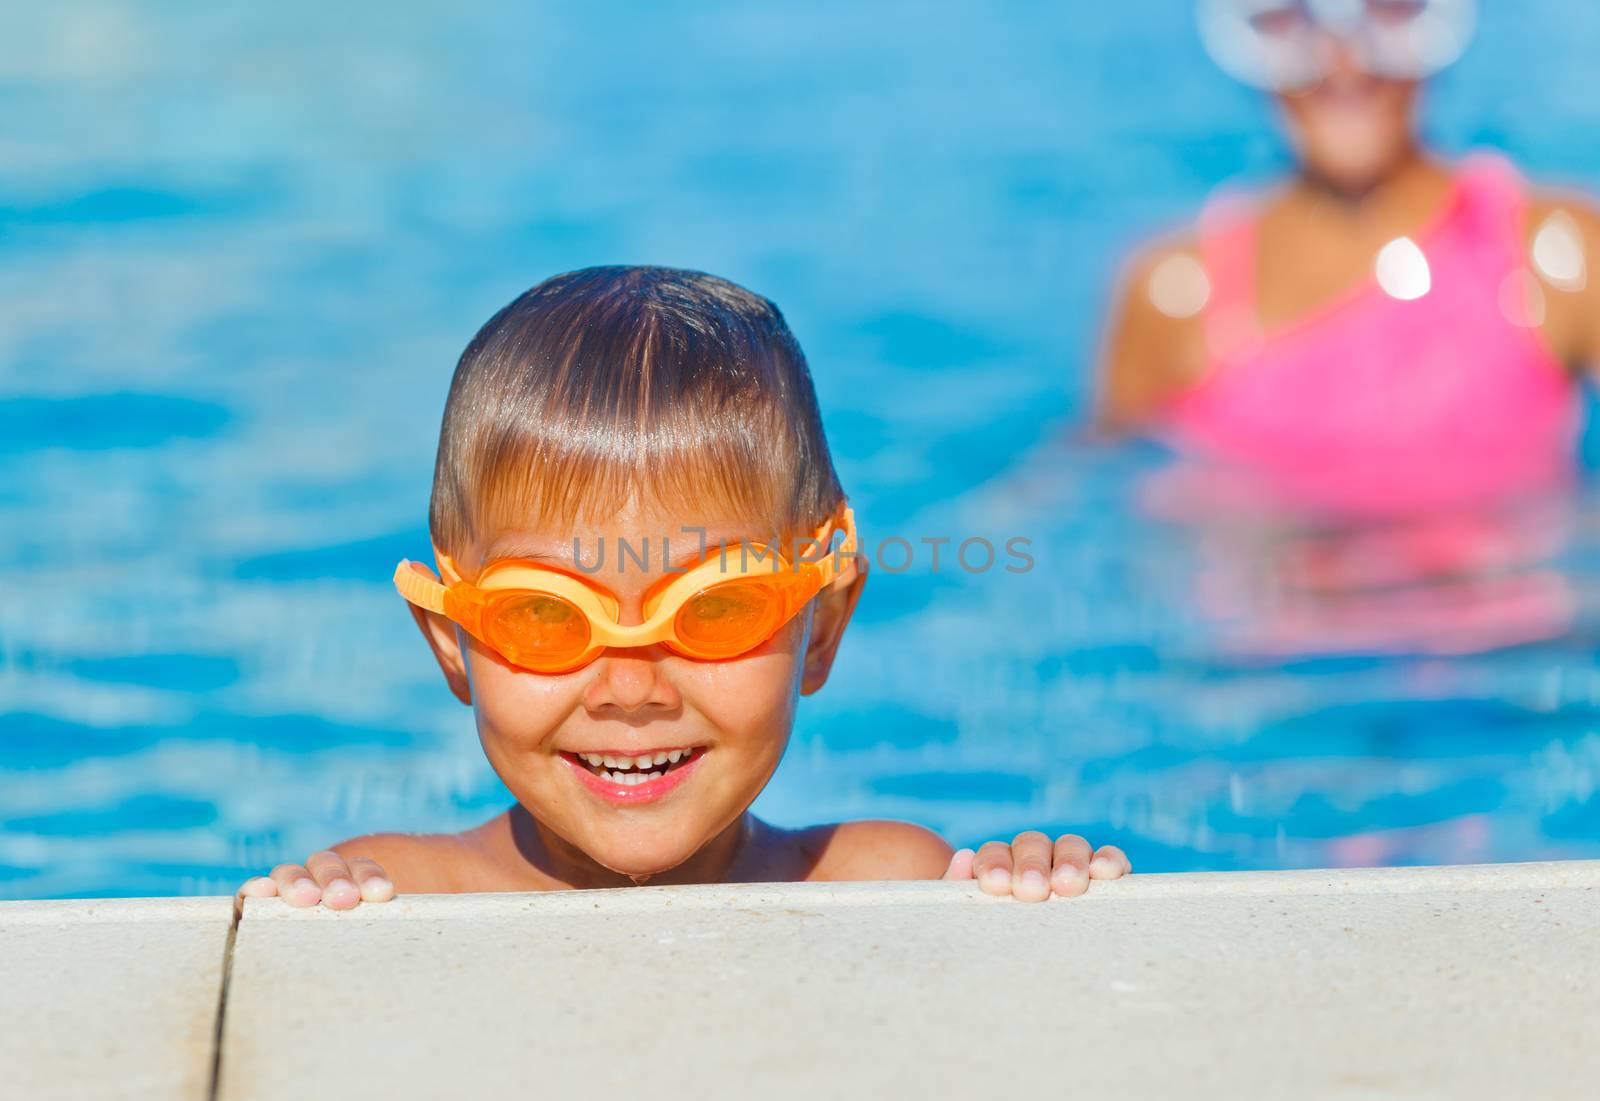 Activities on the pool. Cute boy in swimming pool